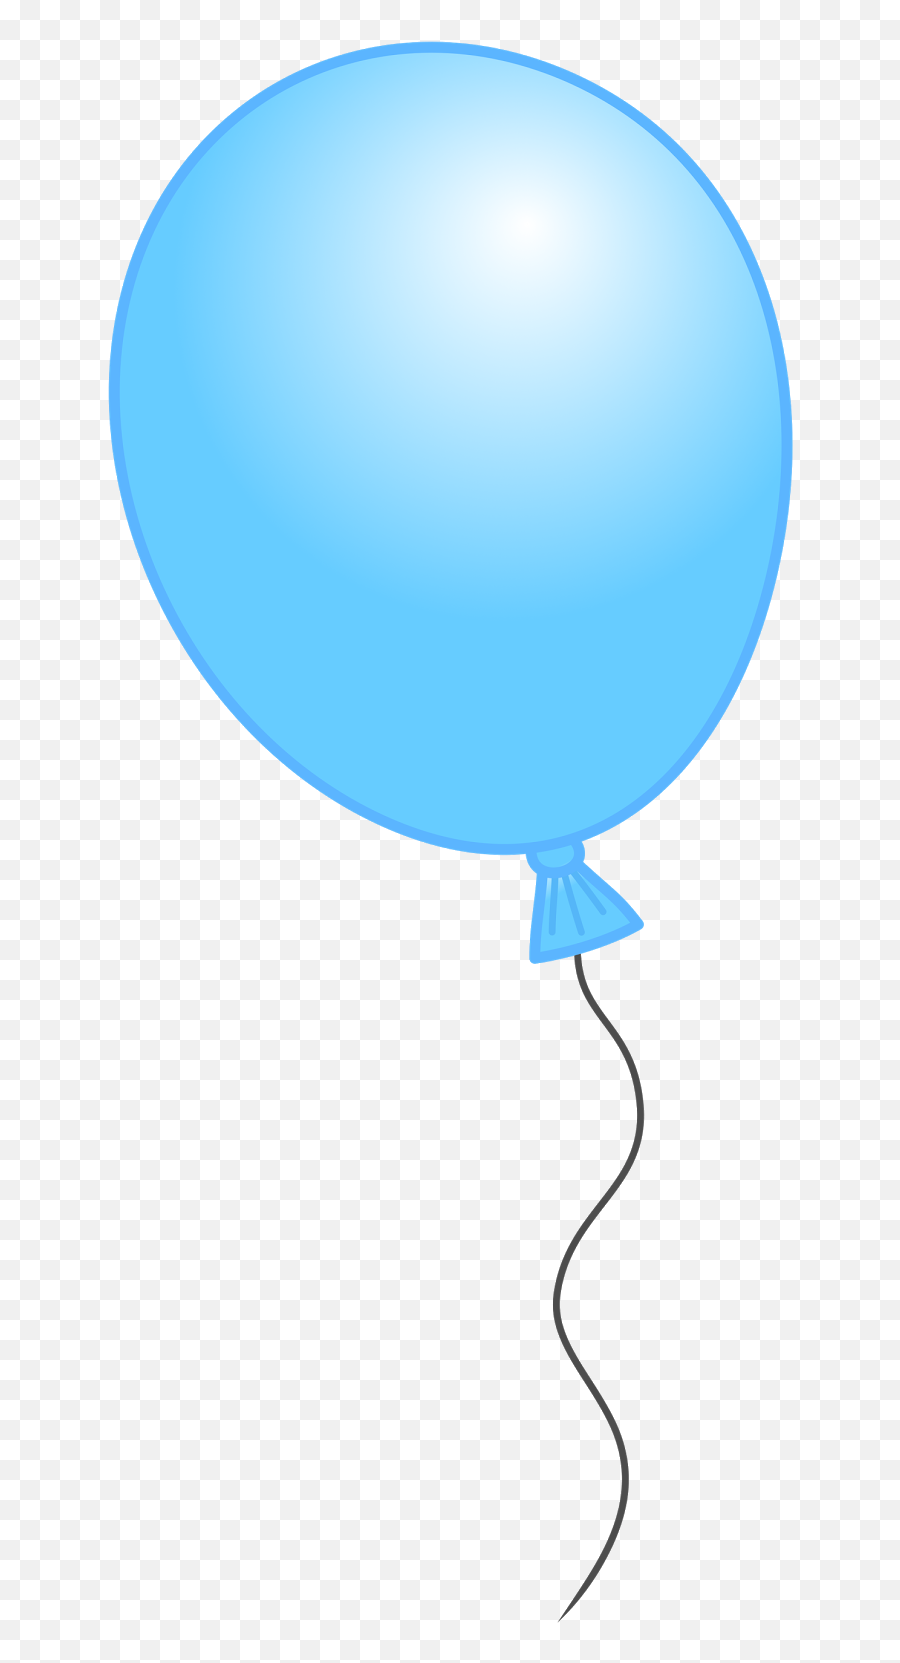 Blue Balloon Png 28091 - Free Icons And Png Backgrounds Balloon,Birthday Balloons Png